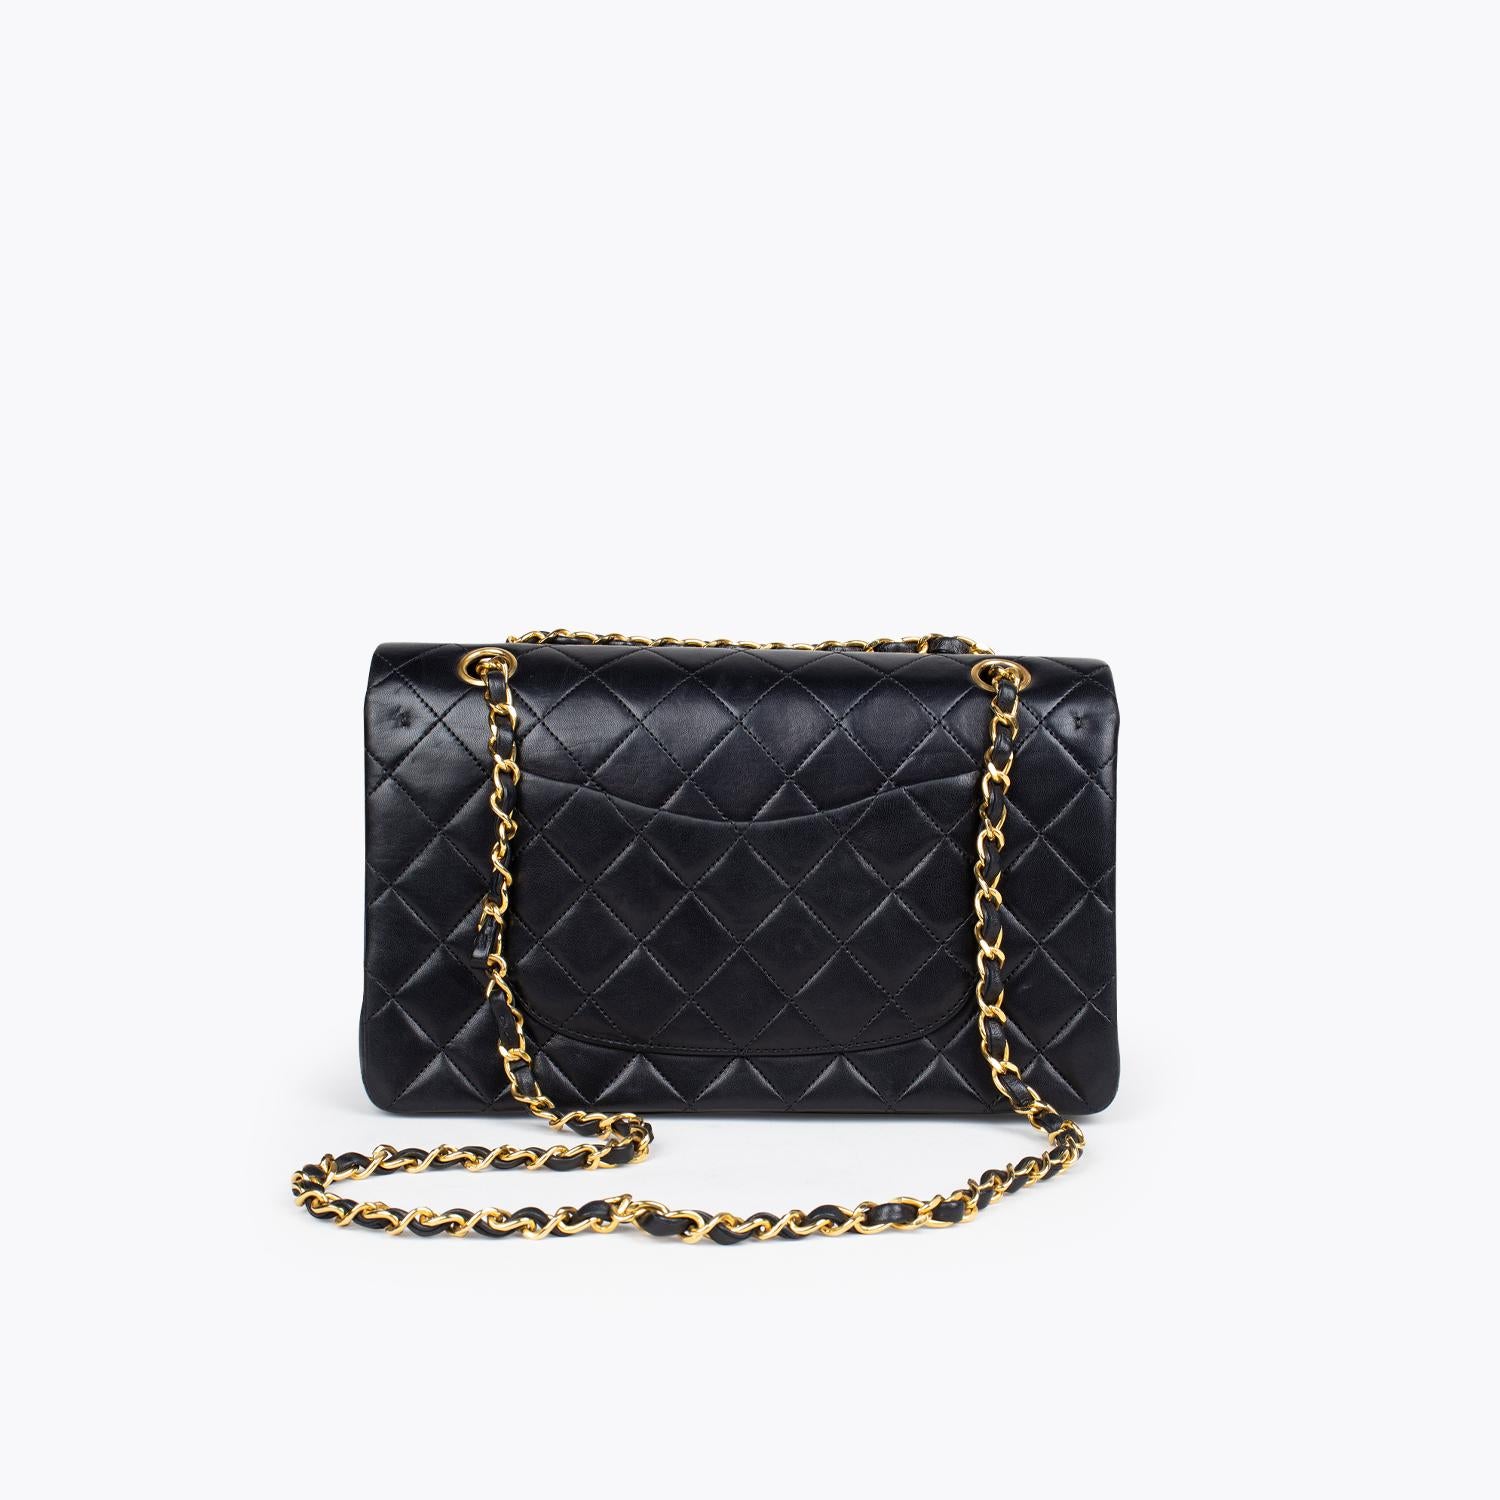 Chanel Medium Classic Double Flap Bag In Good Condition For Sale In Sundbyberg, SE